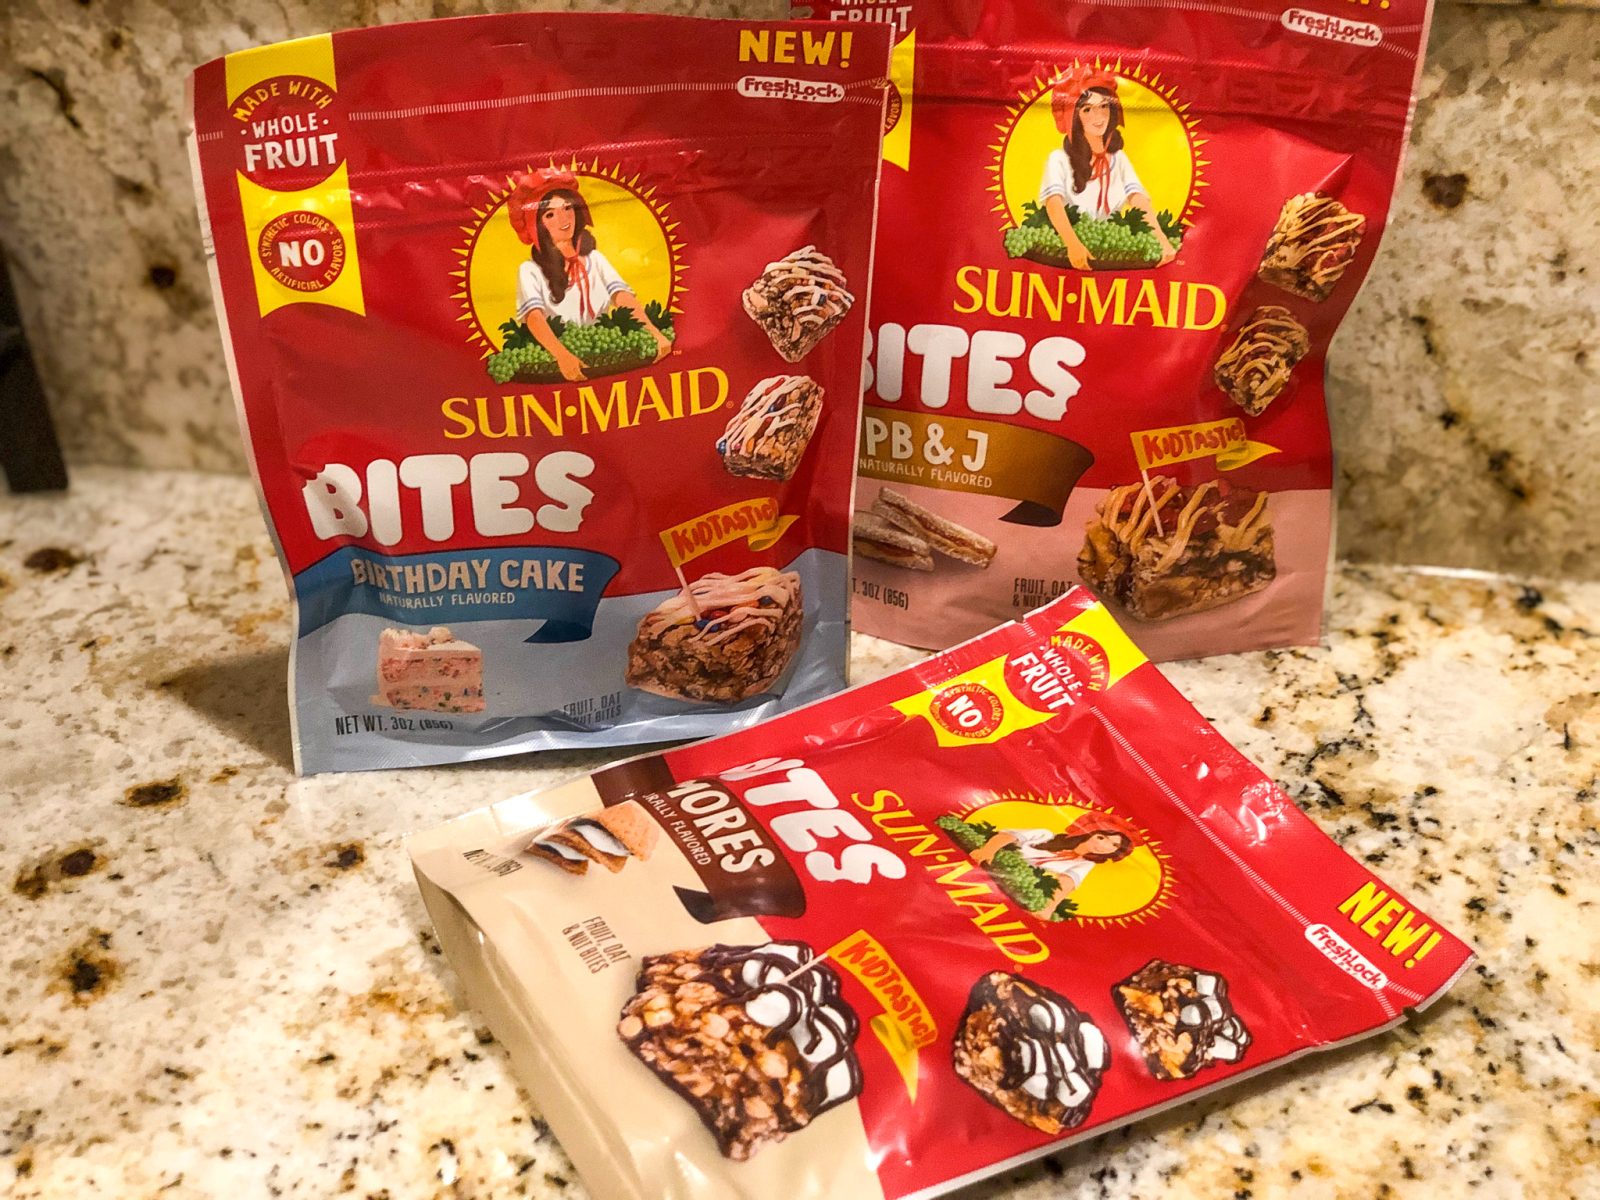 Find Great-Tasting Sun-Maid Bites At Your Local Publix – Save $2 With The Digital Coupon ($1 Per Bag!)